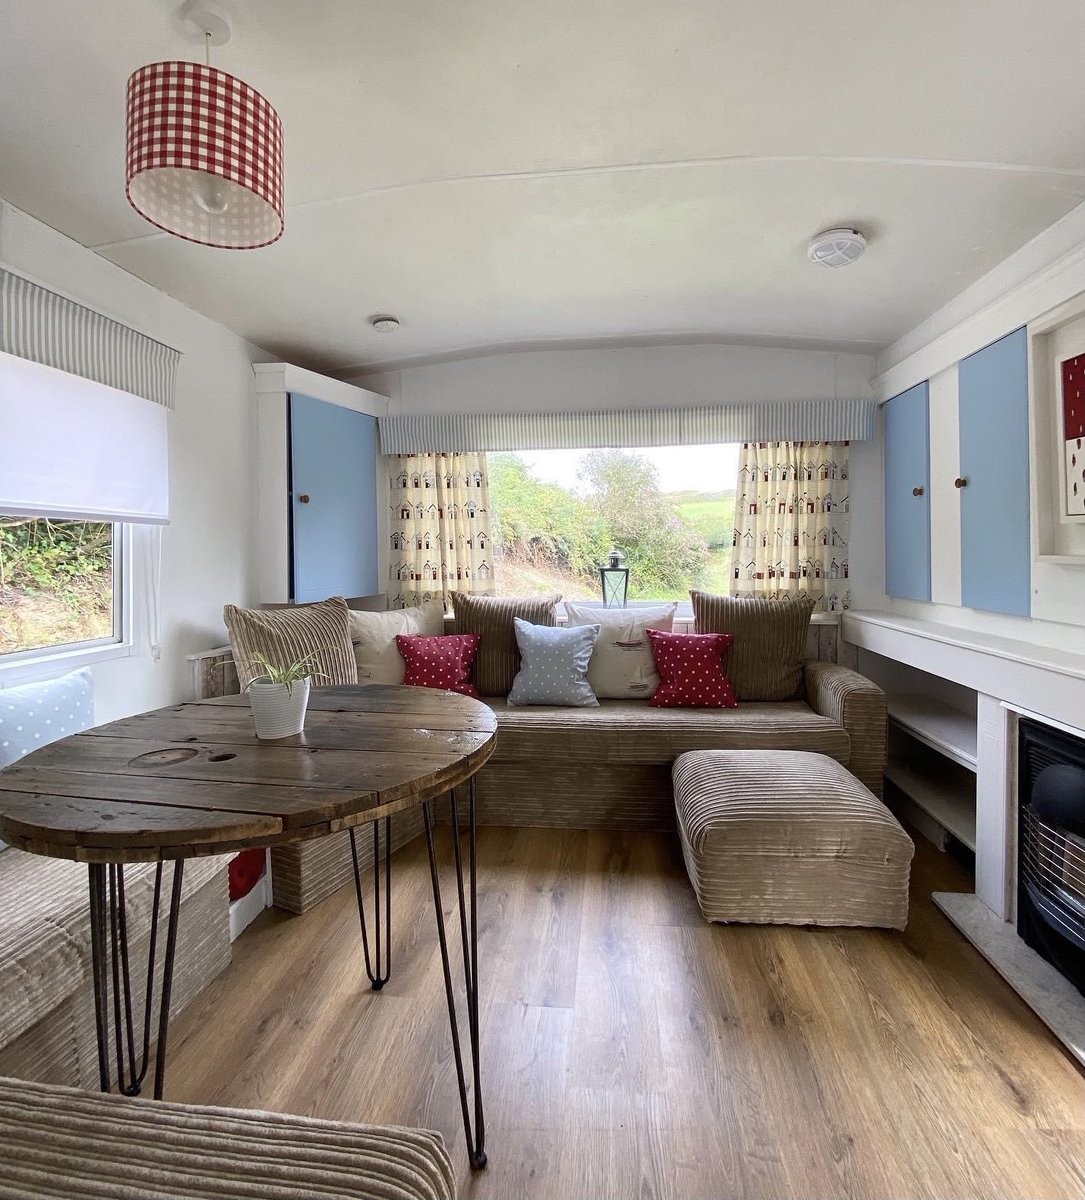 Our stylish chic caravan✨
Escape to a hideaway secluded in countryside & by the sea🌲🌊
hiddenglamping.com
#holiday #holidays #staticcaravan #caravanmakeover #isolated #caravanrenovation #shabbychic #countryside #seaside #coastal #airbnb #staycationuk #cornwall #mawganporth